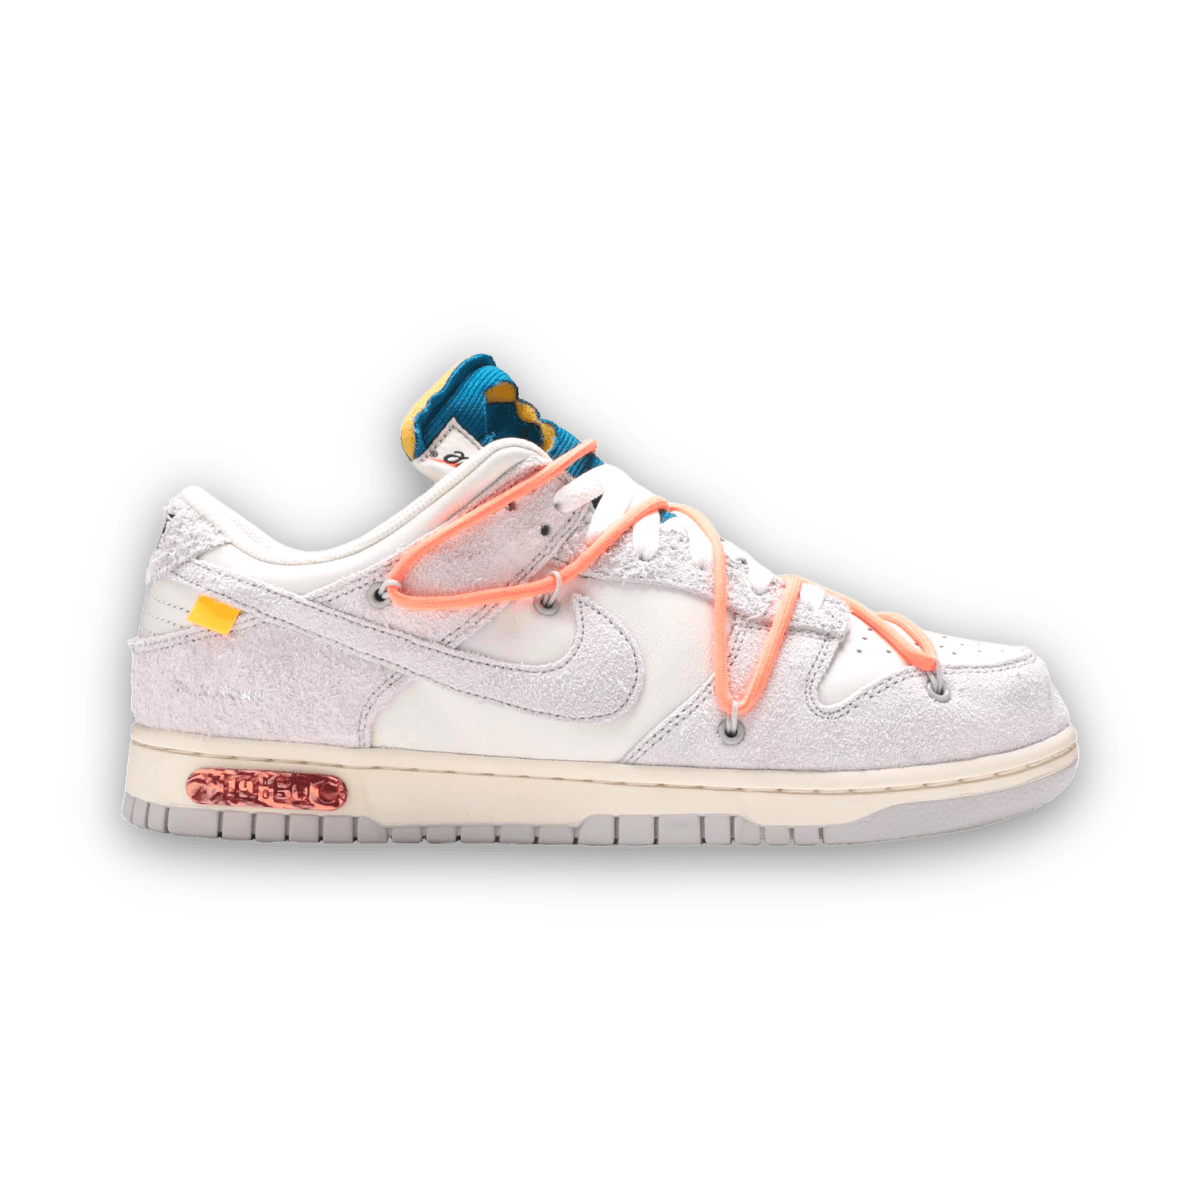 Off-White x Dunk Low 'Lot 19 of 50' - Low Sneaker - Dunks - Jawns on Fire